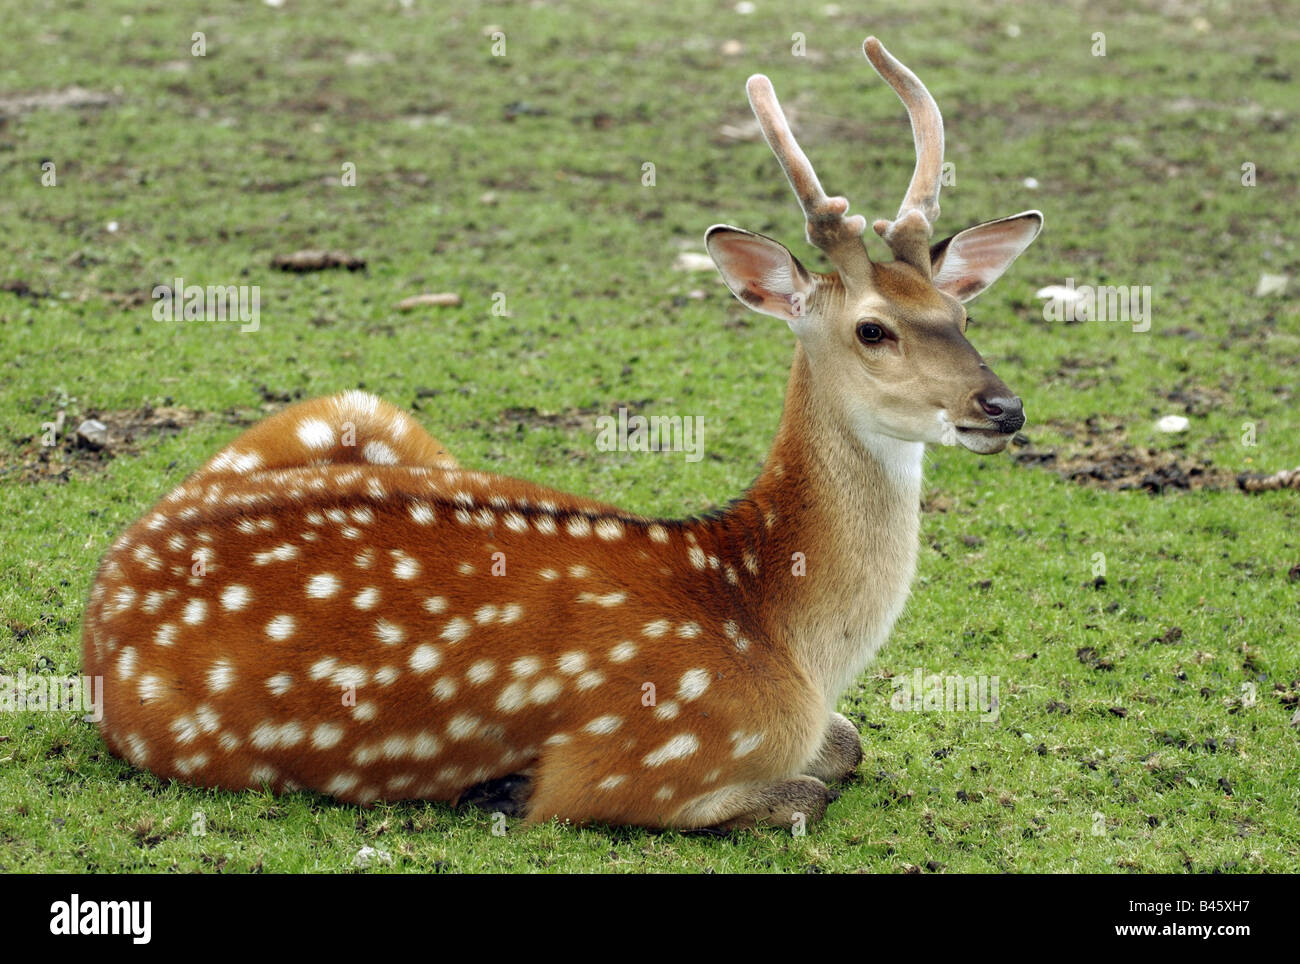 Zoologie/Tiere, Säugetiere, Säugetier/Rehe, Sika Deer Dybowski's, (Cervus Nippon dybowski), sitzend, Verbreitung: Europa, Asien, Additional-Rights - Clearance-Info - Not-Available Stockfoto